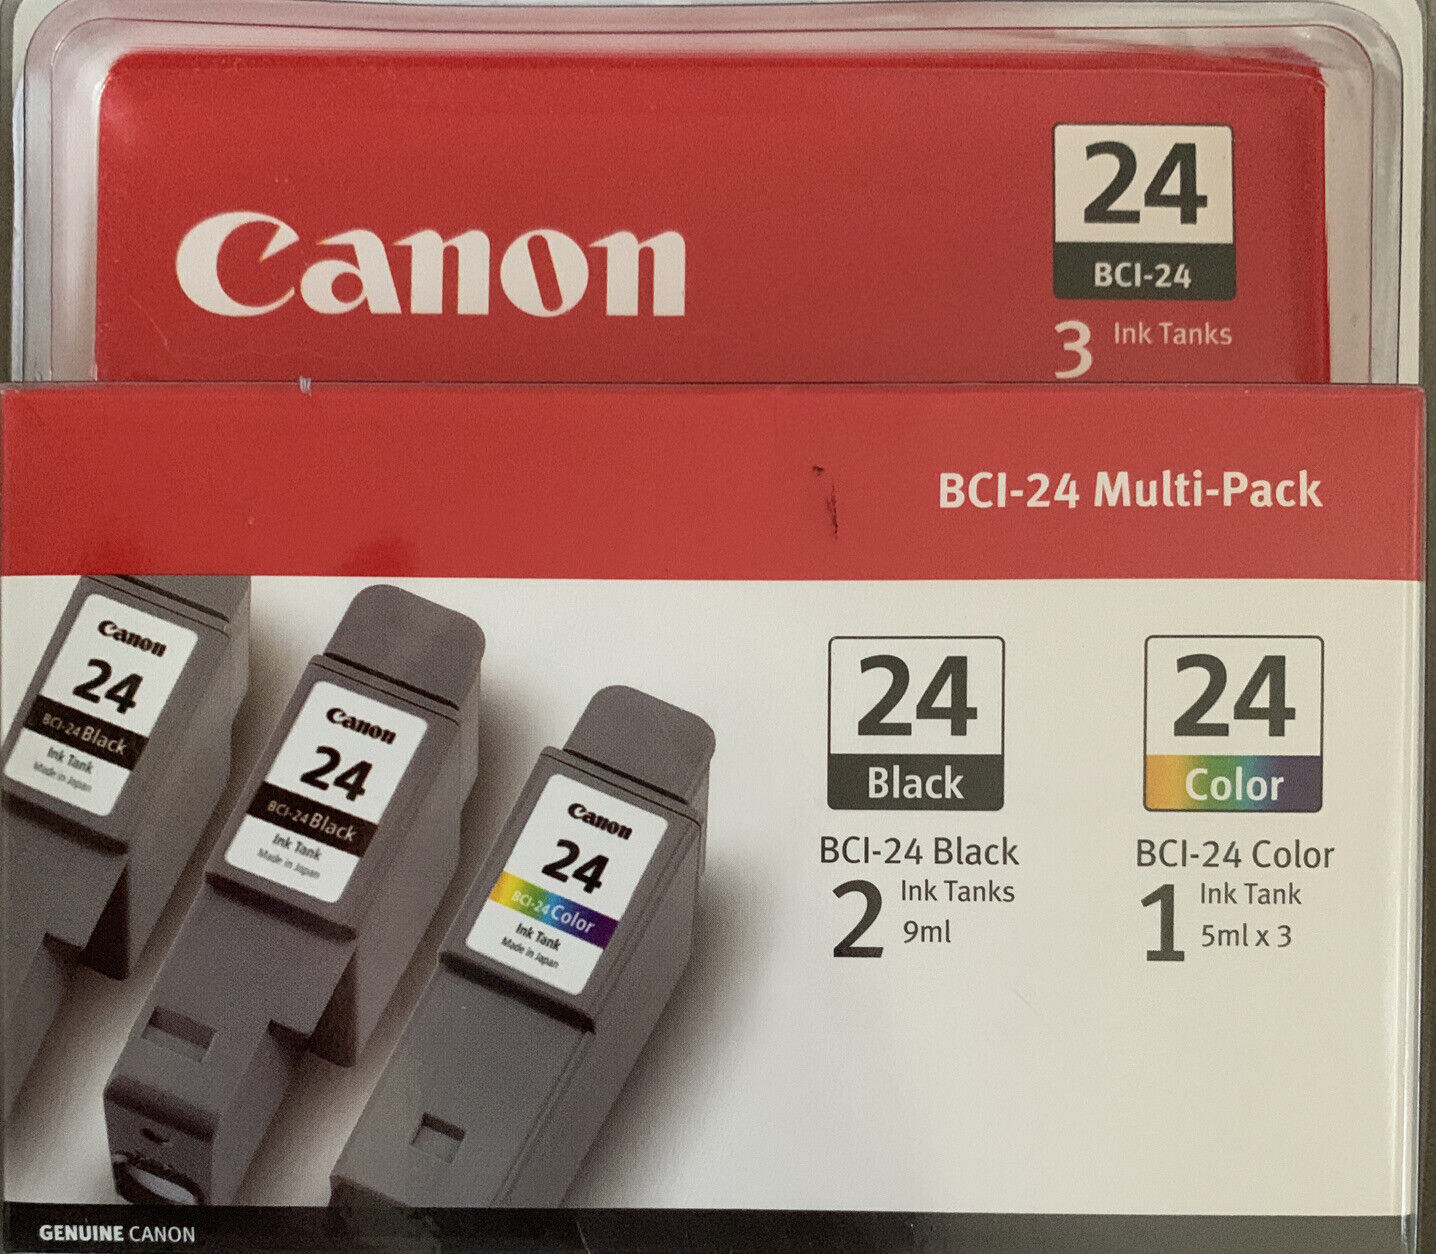 Canon BCI-24 Ink Cartridges Two Black/One Color 3 Pack Brand New 